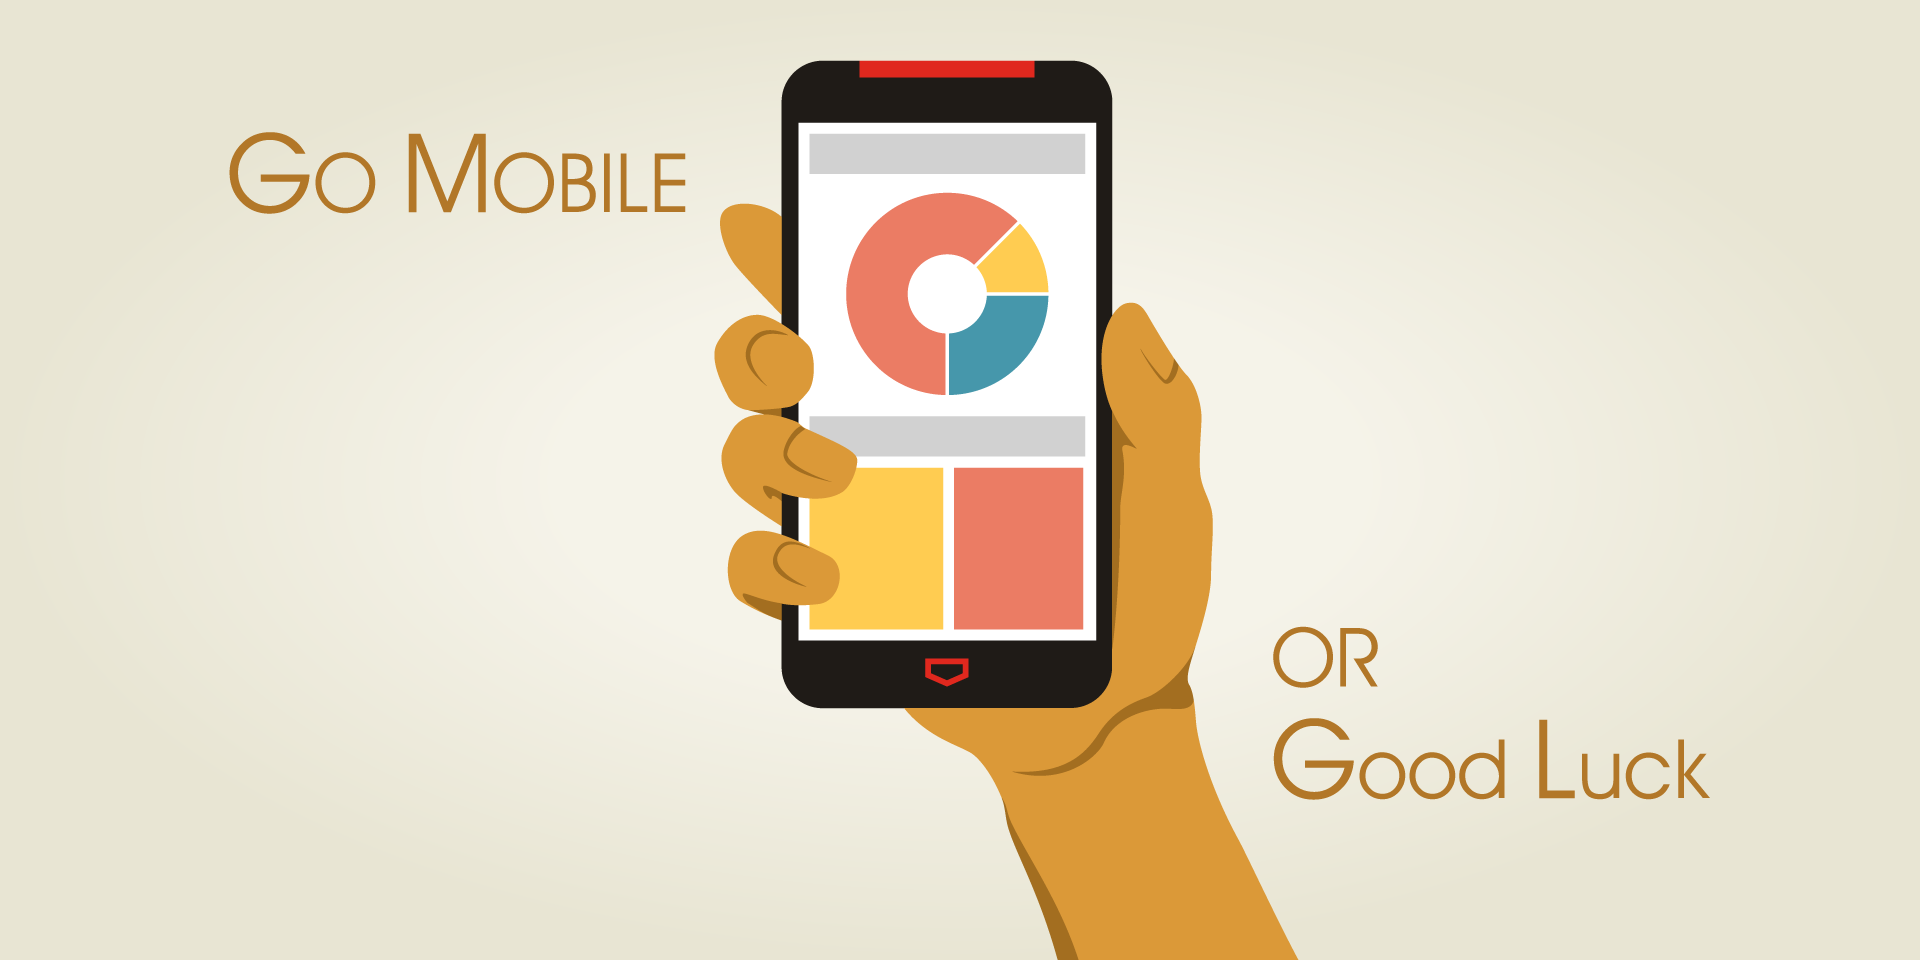 Having a mobile-friendly application process means you can reach a larger number of candidates